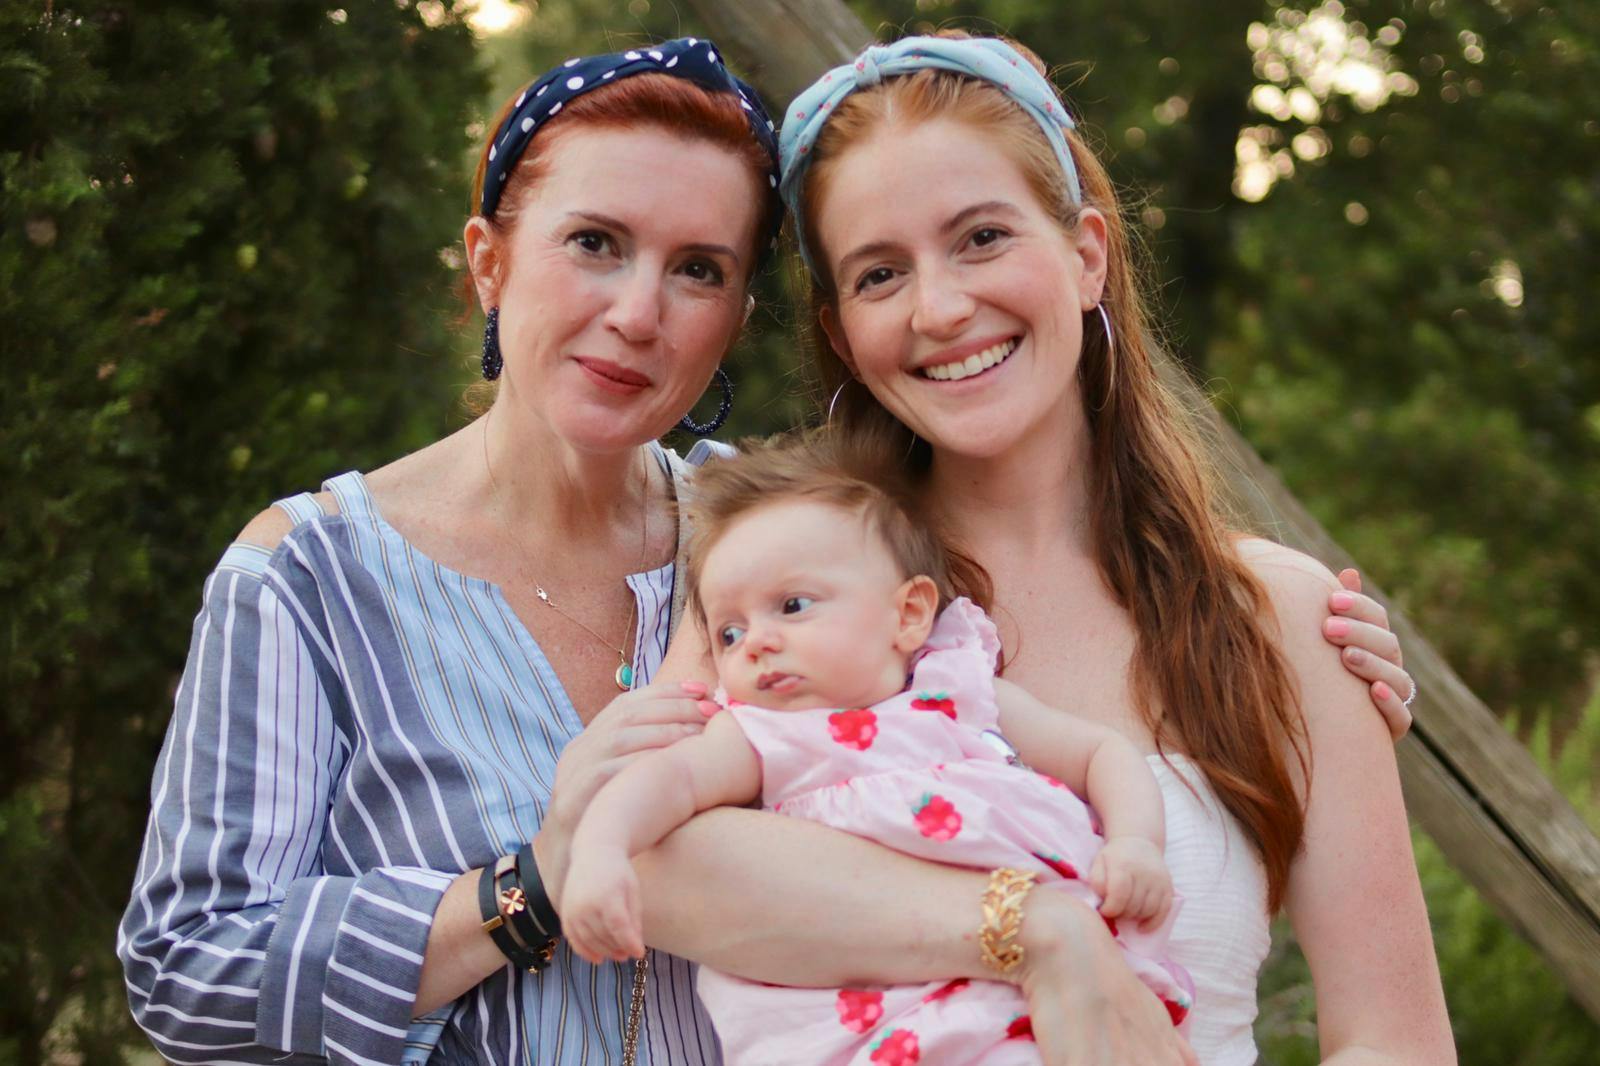 Left to right: Jane’s mother Melanie, Jane and her daughter Reva on vacation in Tuscany in 2019.